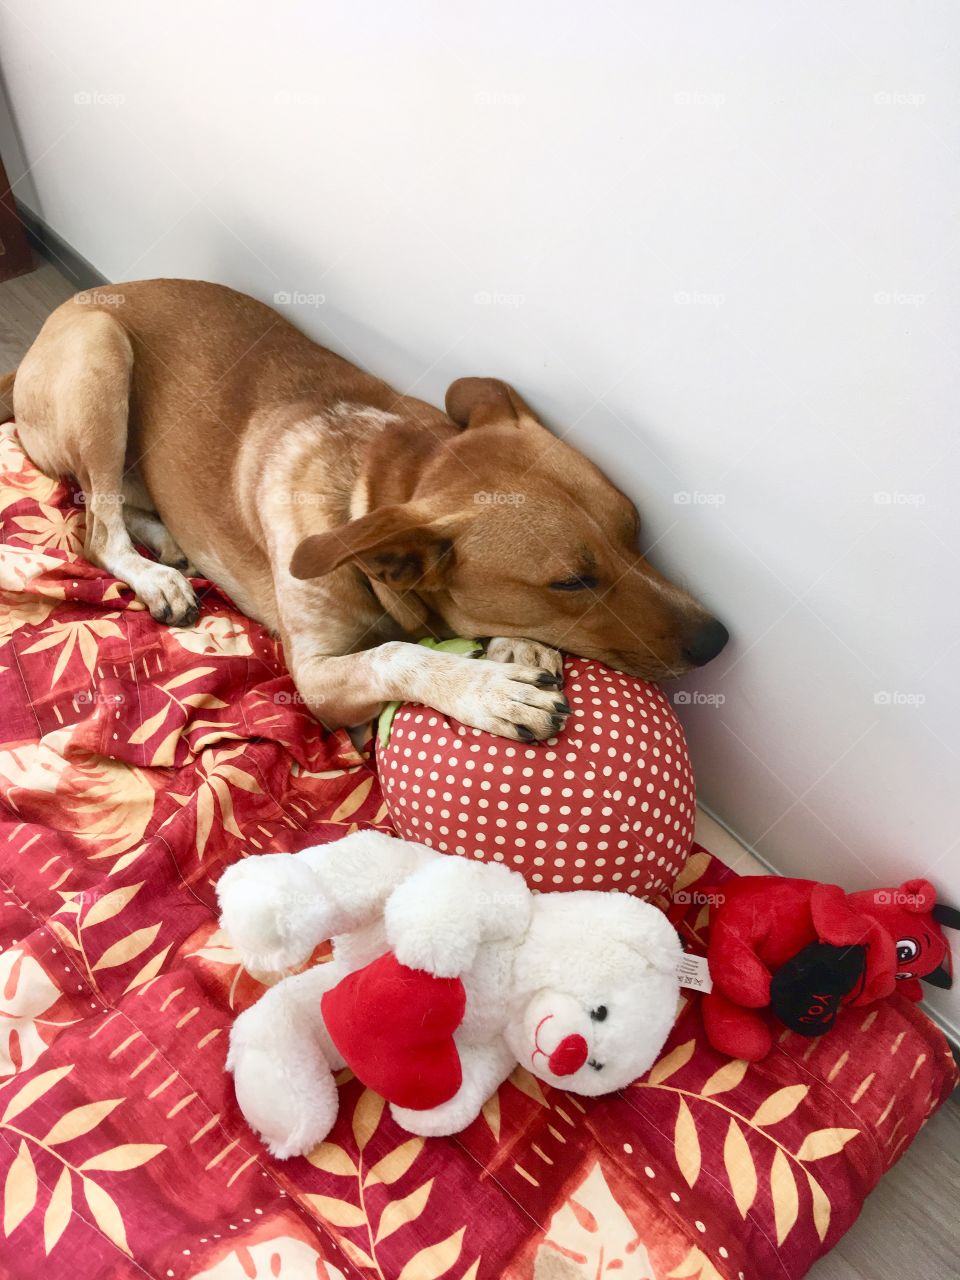 Adorable dog sleeping on his bed with his stuffed animals